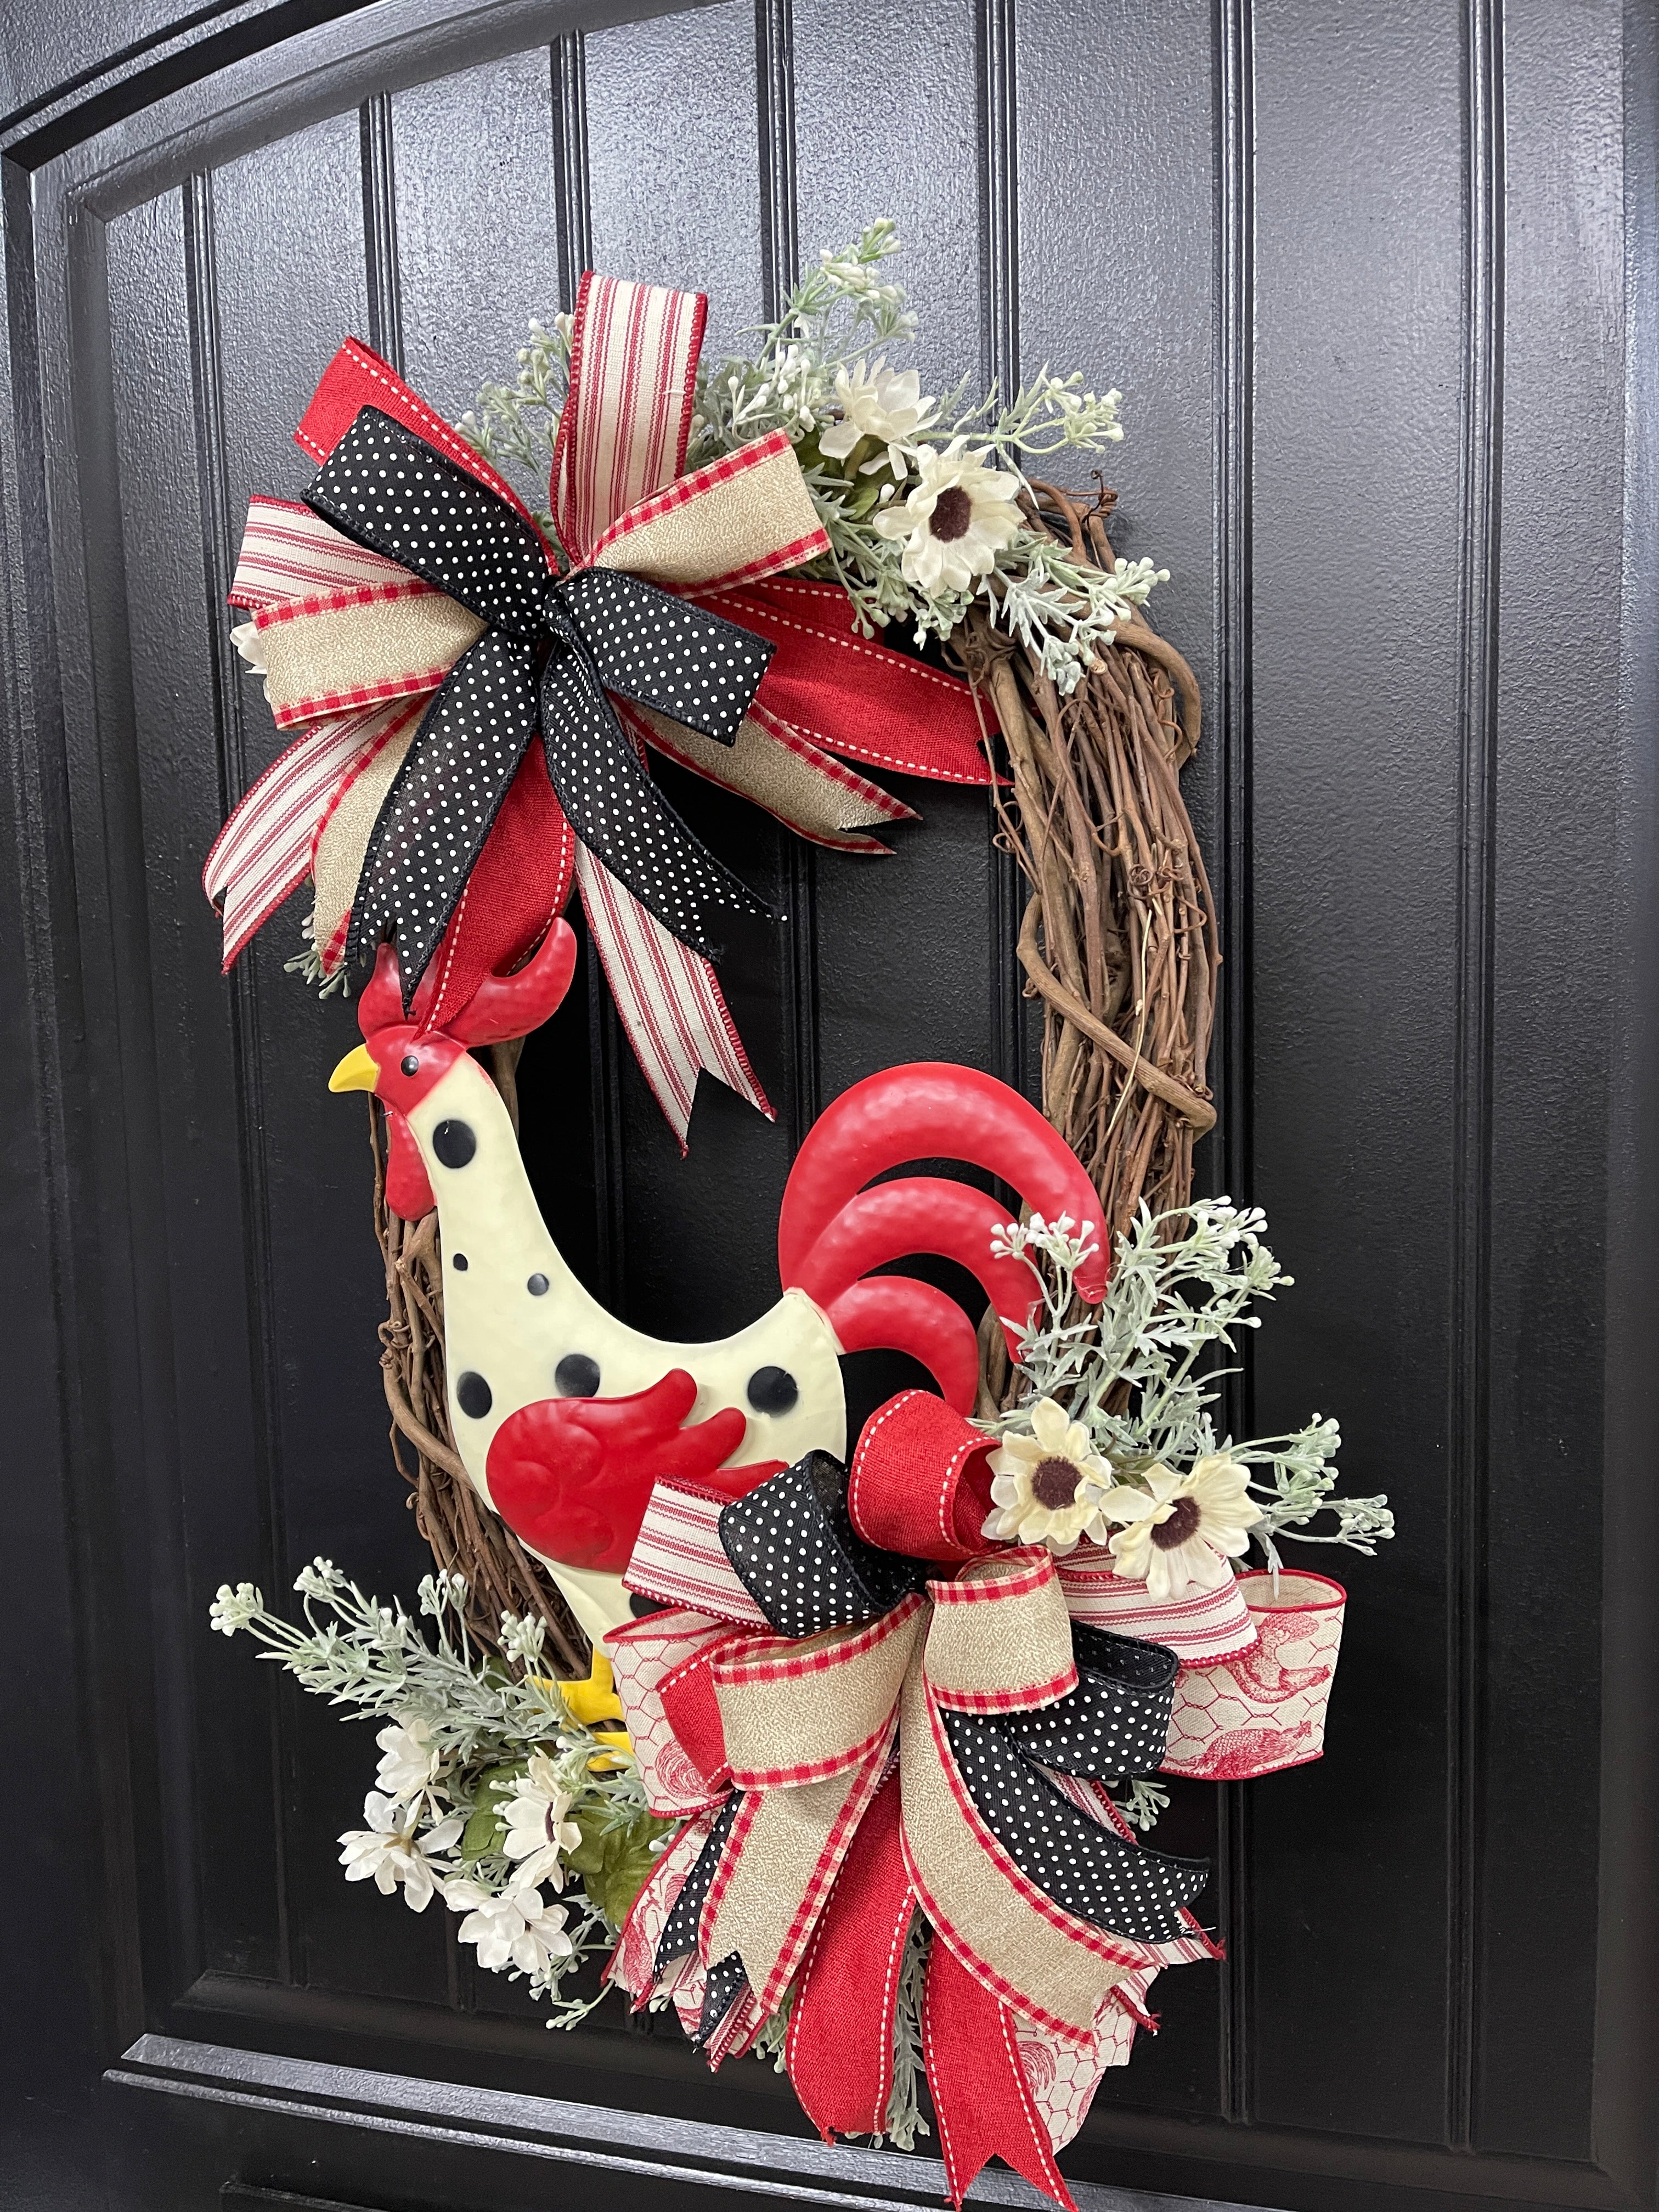 Right Side View of Metal Red, Black and Tan Rooster Floral Grapevine Wreath with 2 bows on Black Door